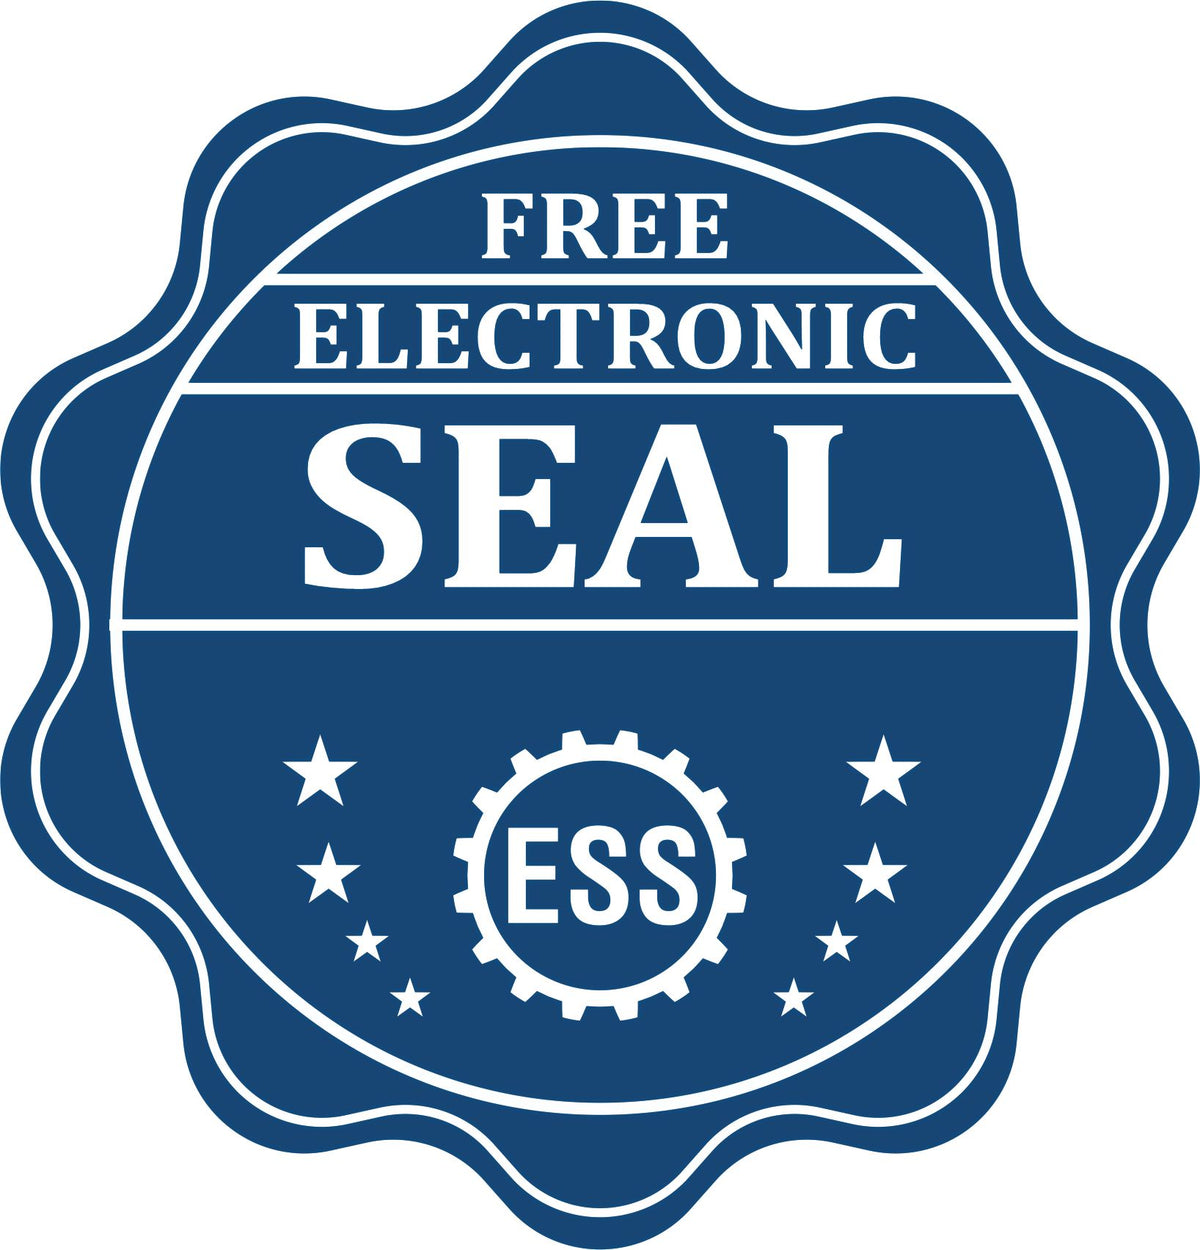 A badge showing a free electronic seal for the New Hampshire Professional Engineer Seal Stamp with stars and the ESS gear on the emblem.